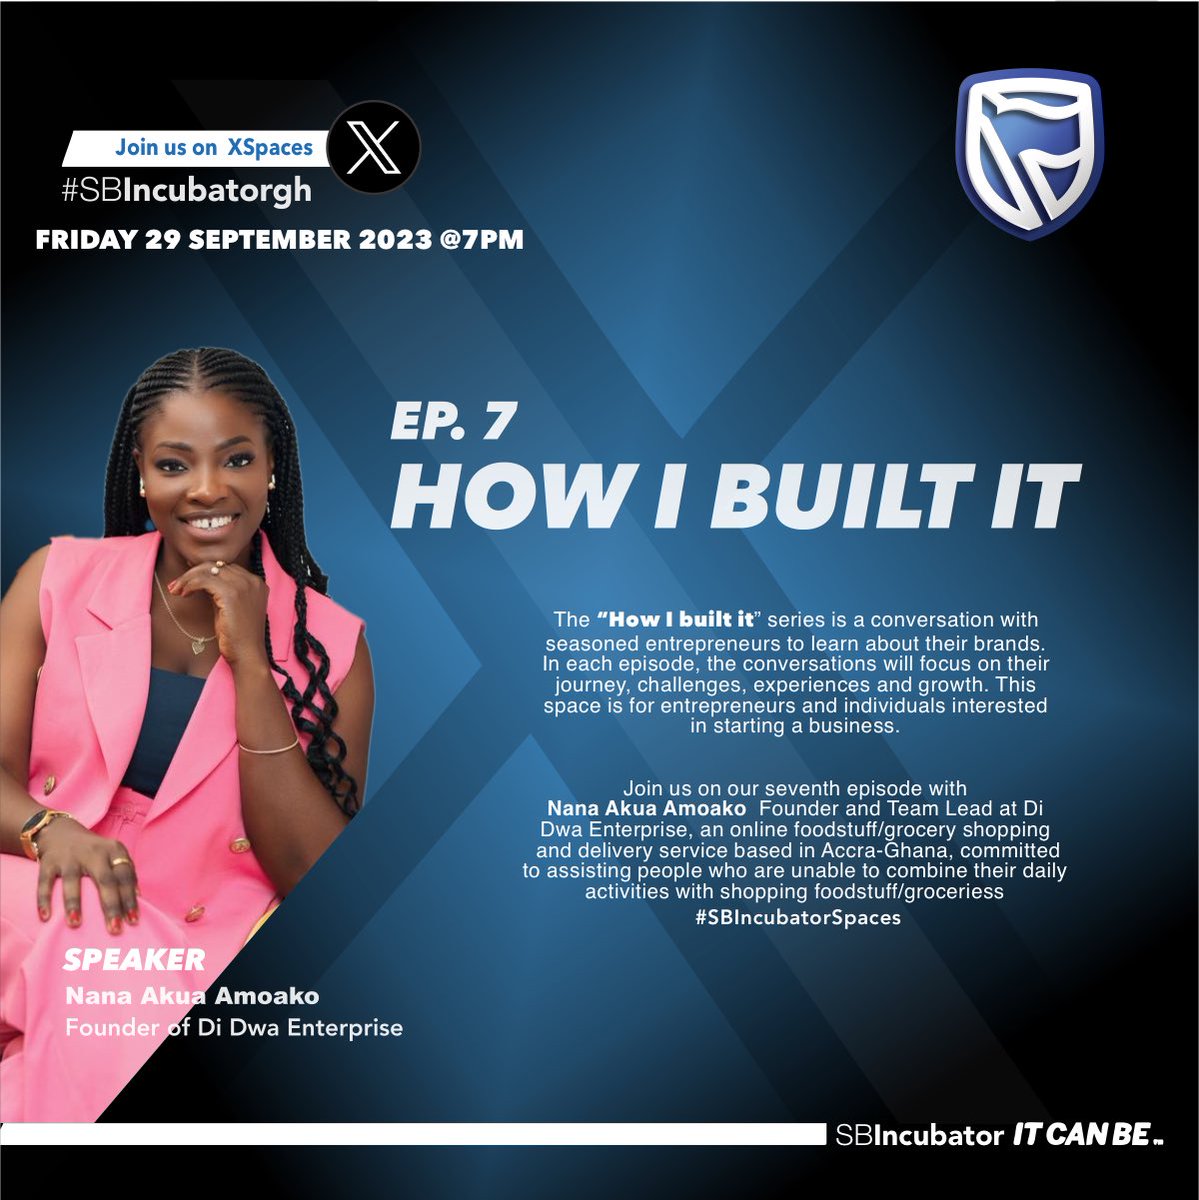 Welcome to another episode of the HOW I BUILT IT series on this episode we will be hosting Nana Akua Amoako, founder & team lead of Di Dwa Enterprise Click the link to mark your calendars you don’t want to miss this one #SBincubatorgh #gh #Stanbicbank twitter.com/i/spaces/1Mnxn…